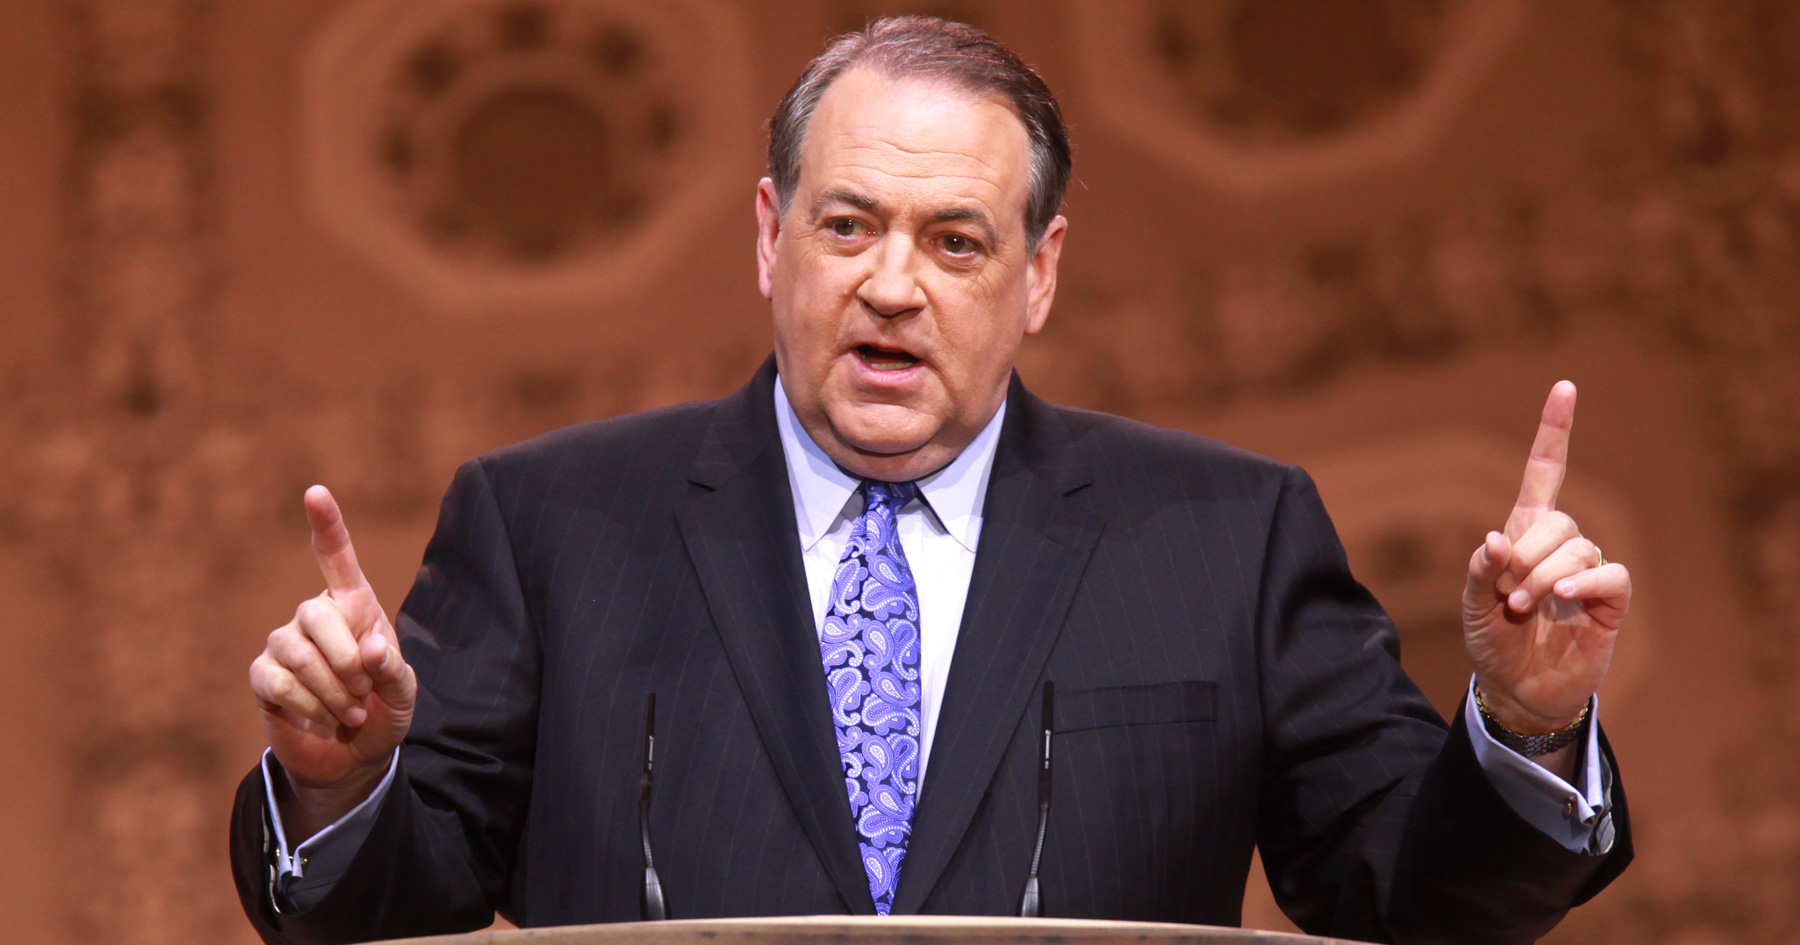 Mike Huckabee speaks at CPAC 2014